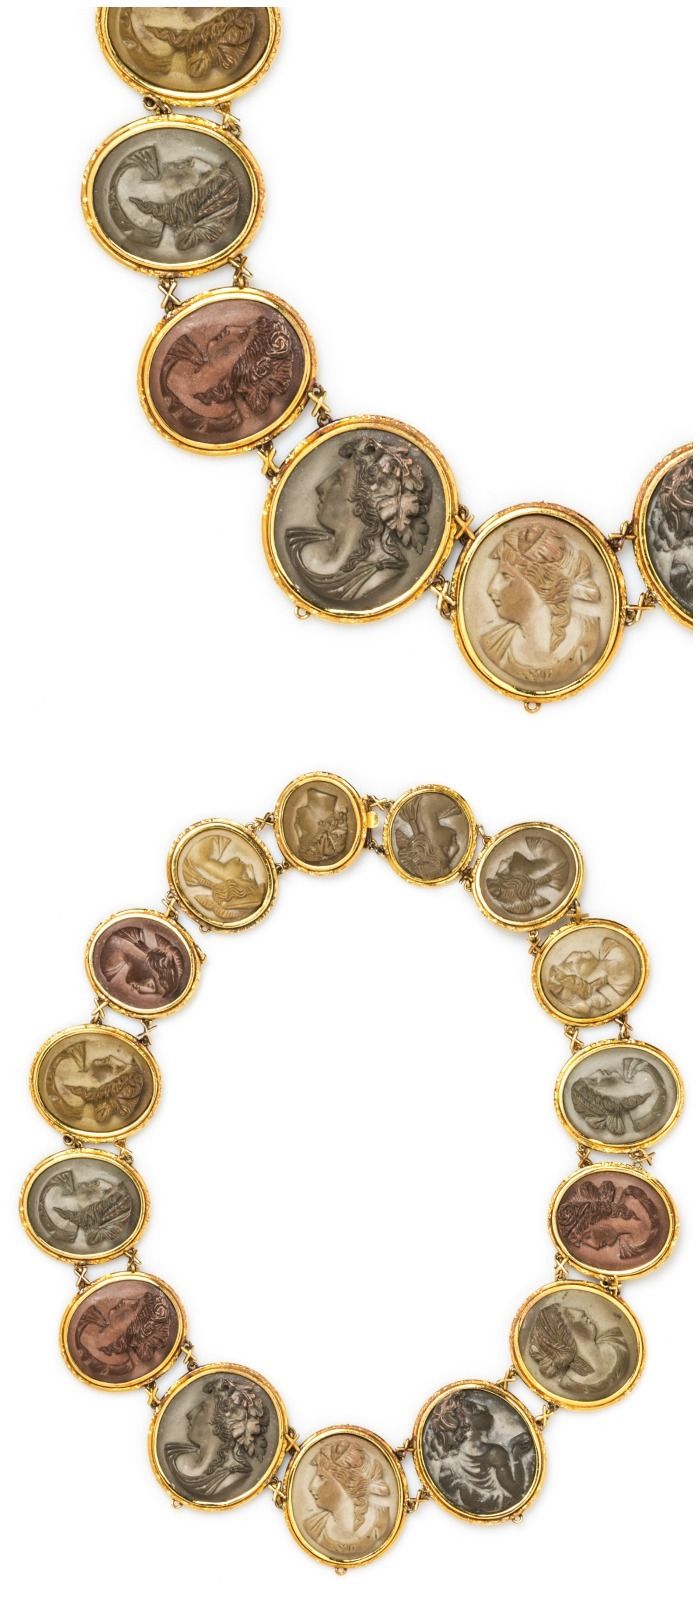 An antique Victorian Yellow Gold and Lava Cameo Necklace, Circa 1860.